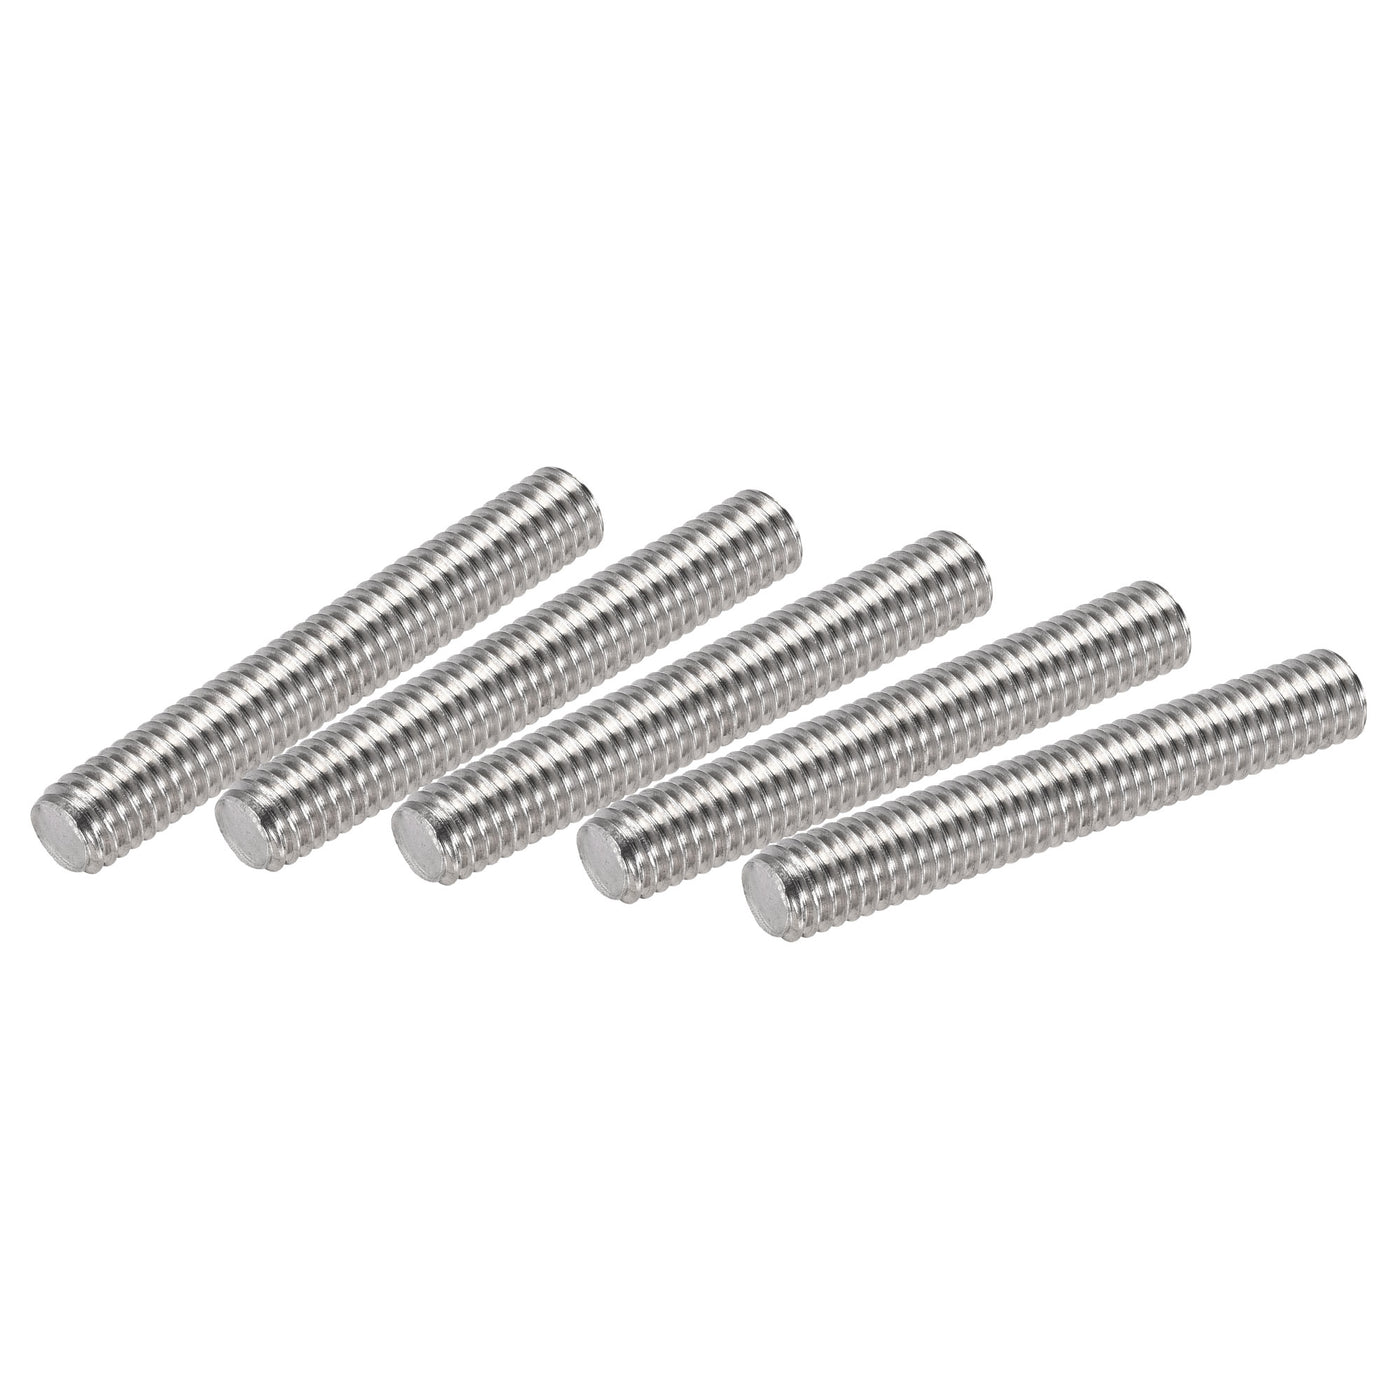 uxcell Uxcell 10pcs M6 x 40mm Fully Threaded Rod 304 Stainless Steel Right Hand 1.0mm Pitch